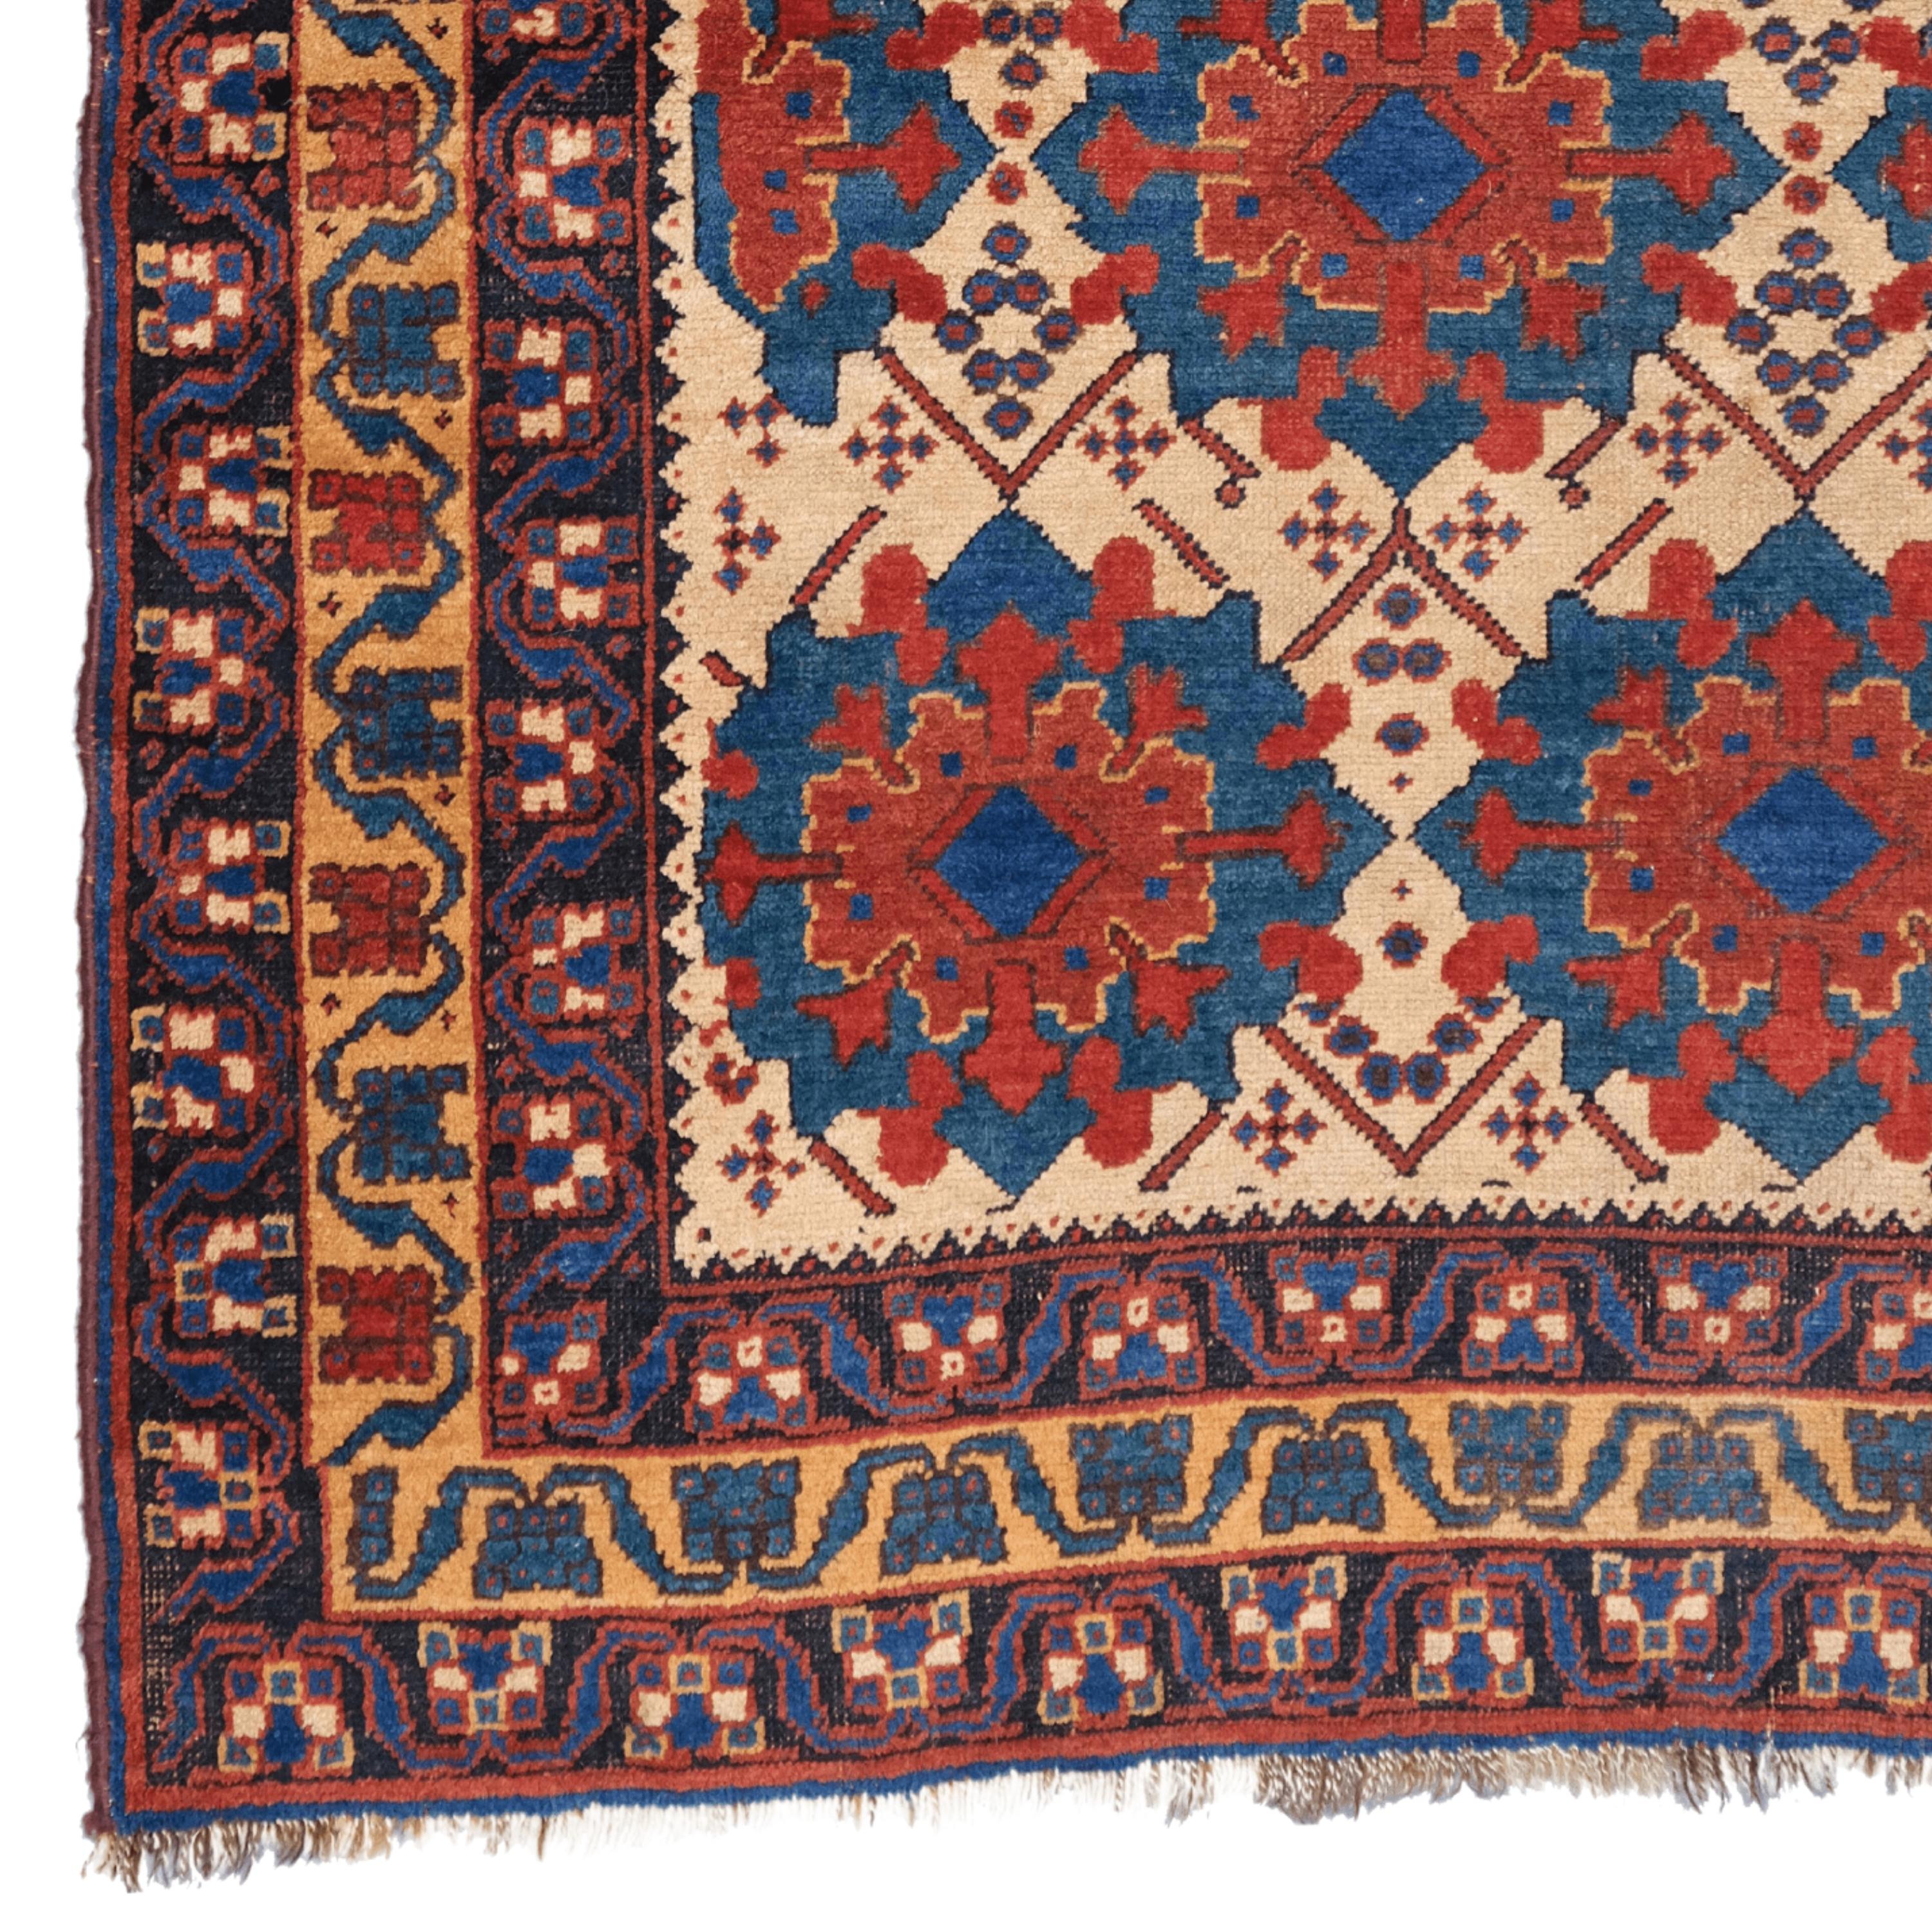 Antique Avshar Rug
19th Century Avshar Rug
The Afshars are a Turkic speaking tribe located in Iran near Kerman.
Both nomadic people and settled in villages.
Afshar rugs are squariesh with geometrical design.
Size : 122×139 cm